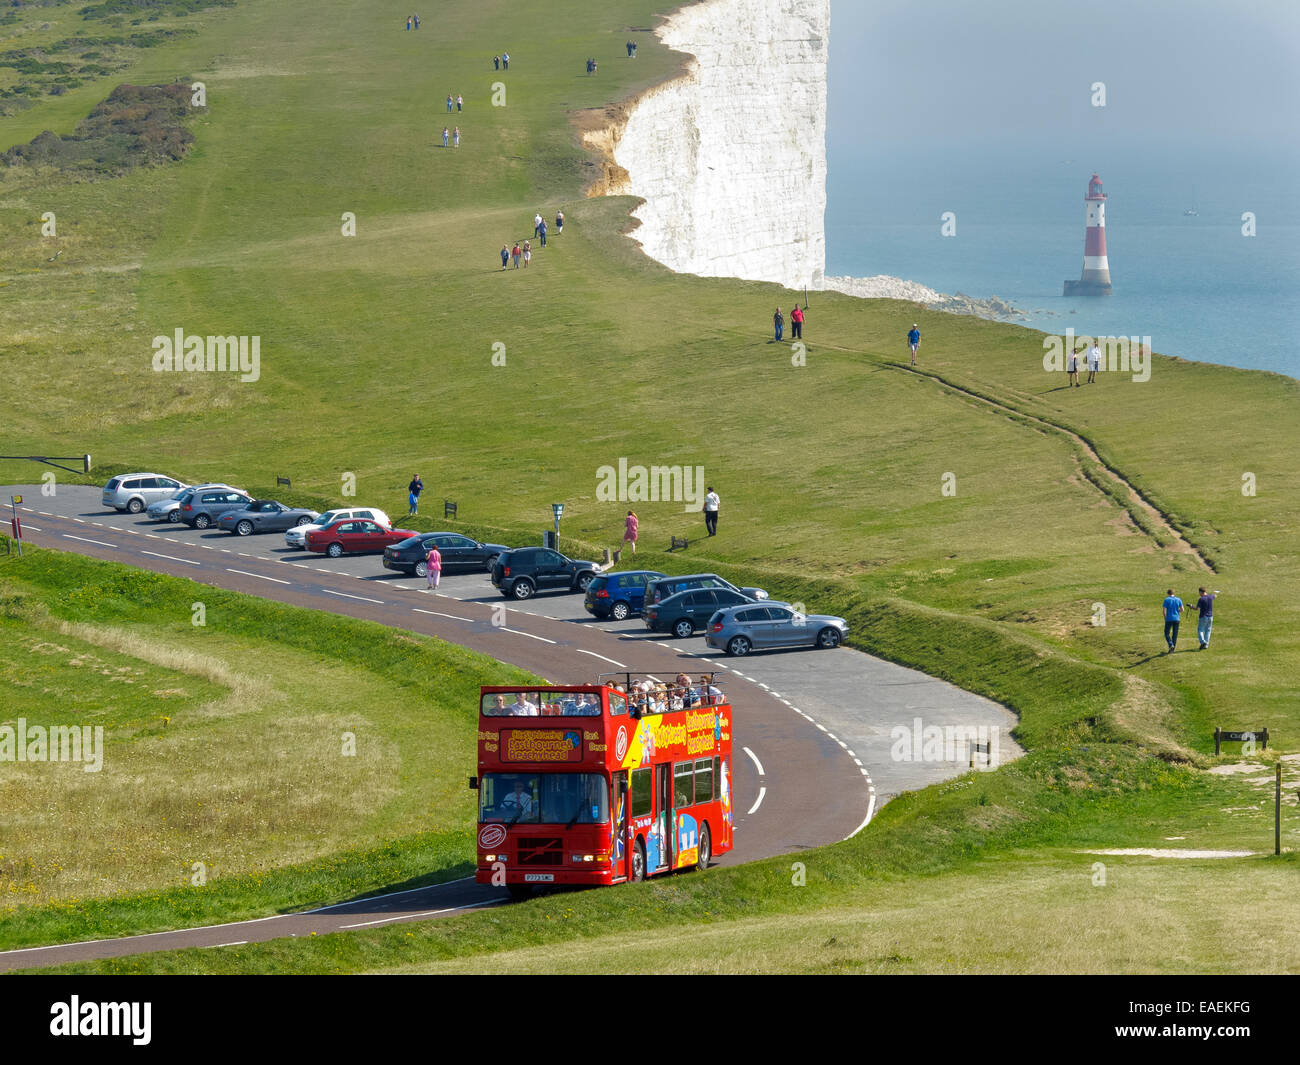 The White Cliffs and Beachy Head lighthouse with a Eastbourne City Sightseeing open top double decker tour bus Stock Photo